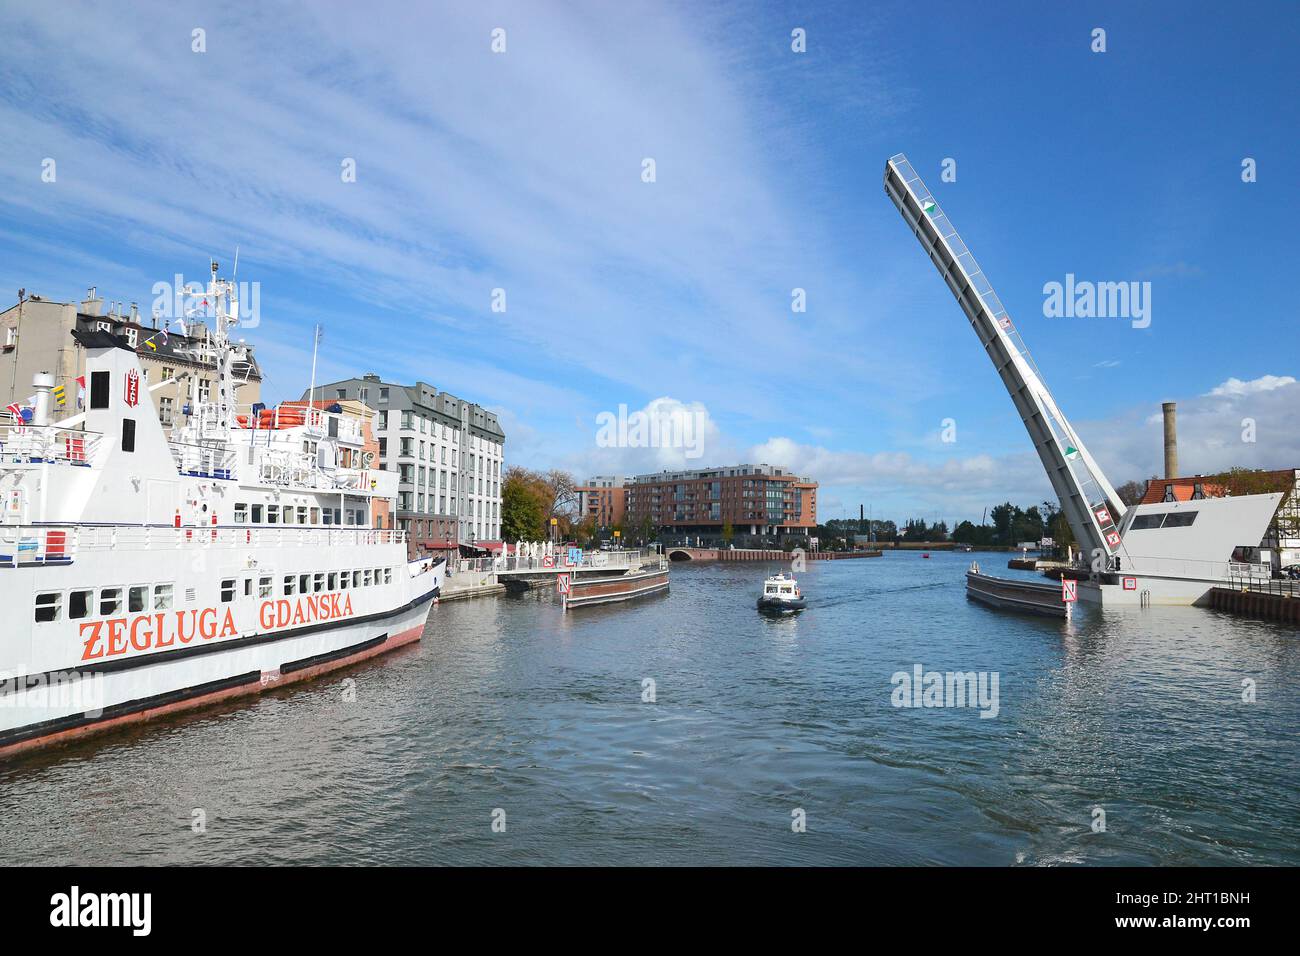 Gdansk, Poland - September 28, 2018: View of lifting bridge in elevated condition, passing boat on Motlawa river in Gdansk, Poland. Stock Photo